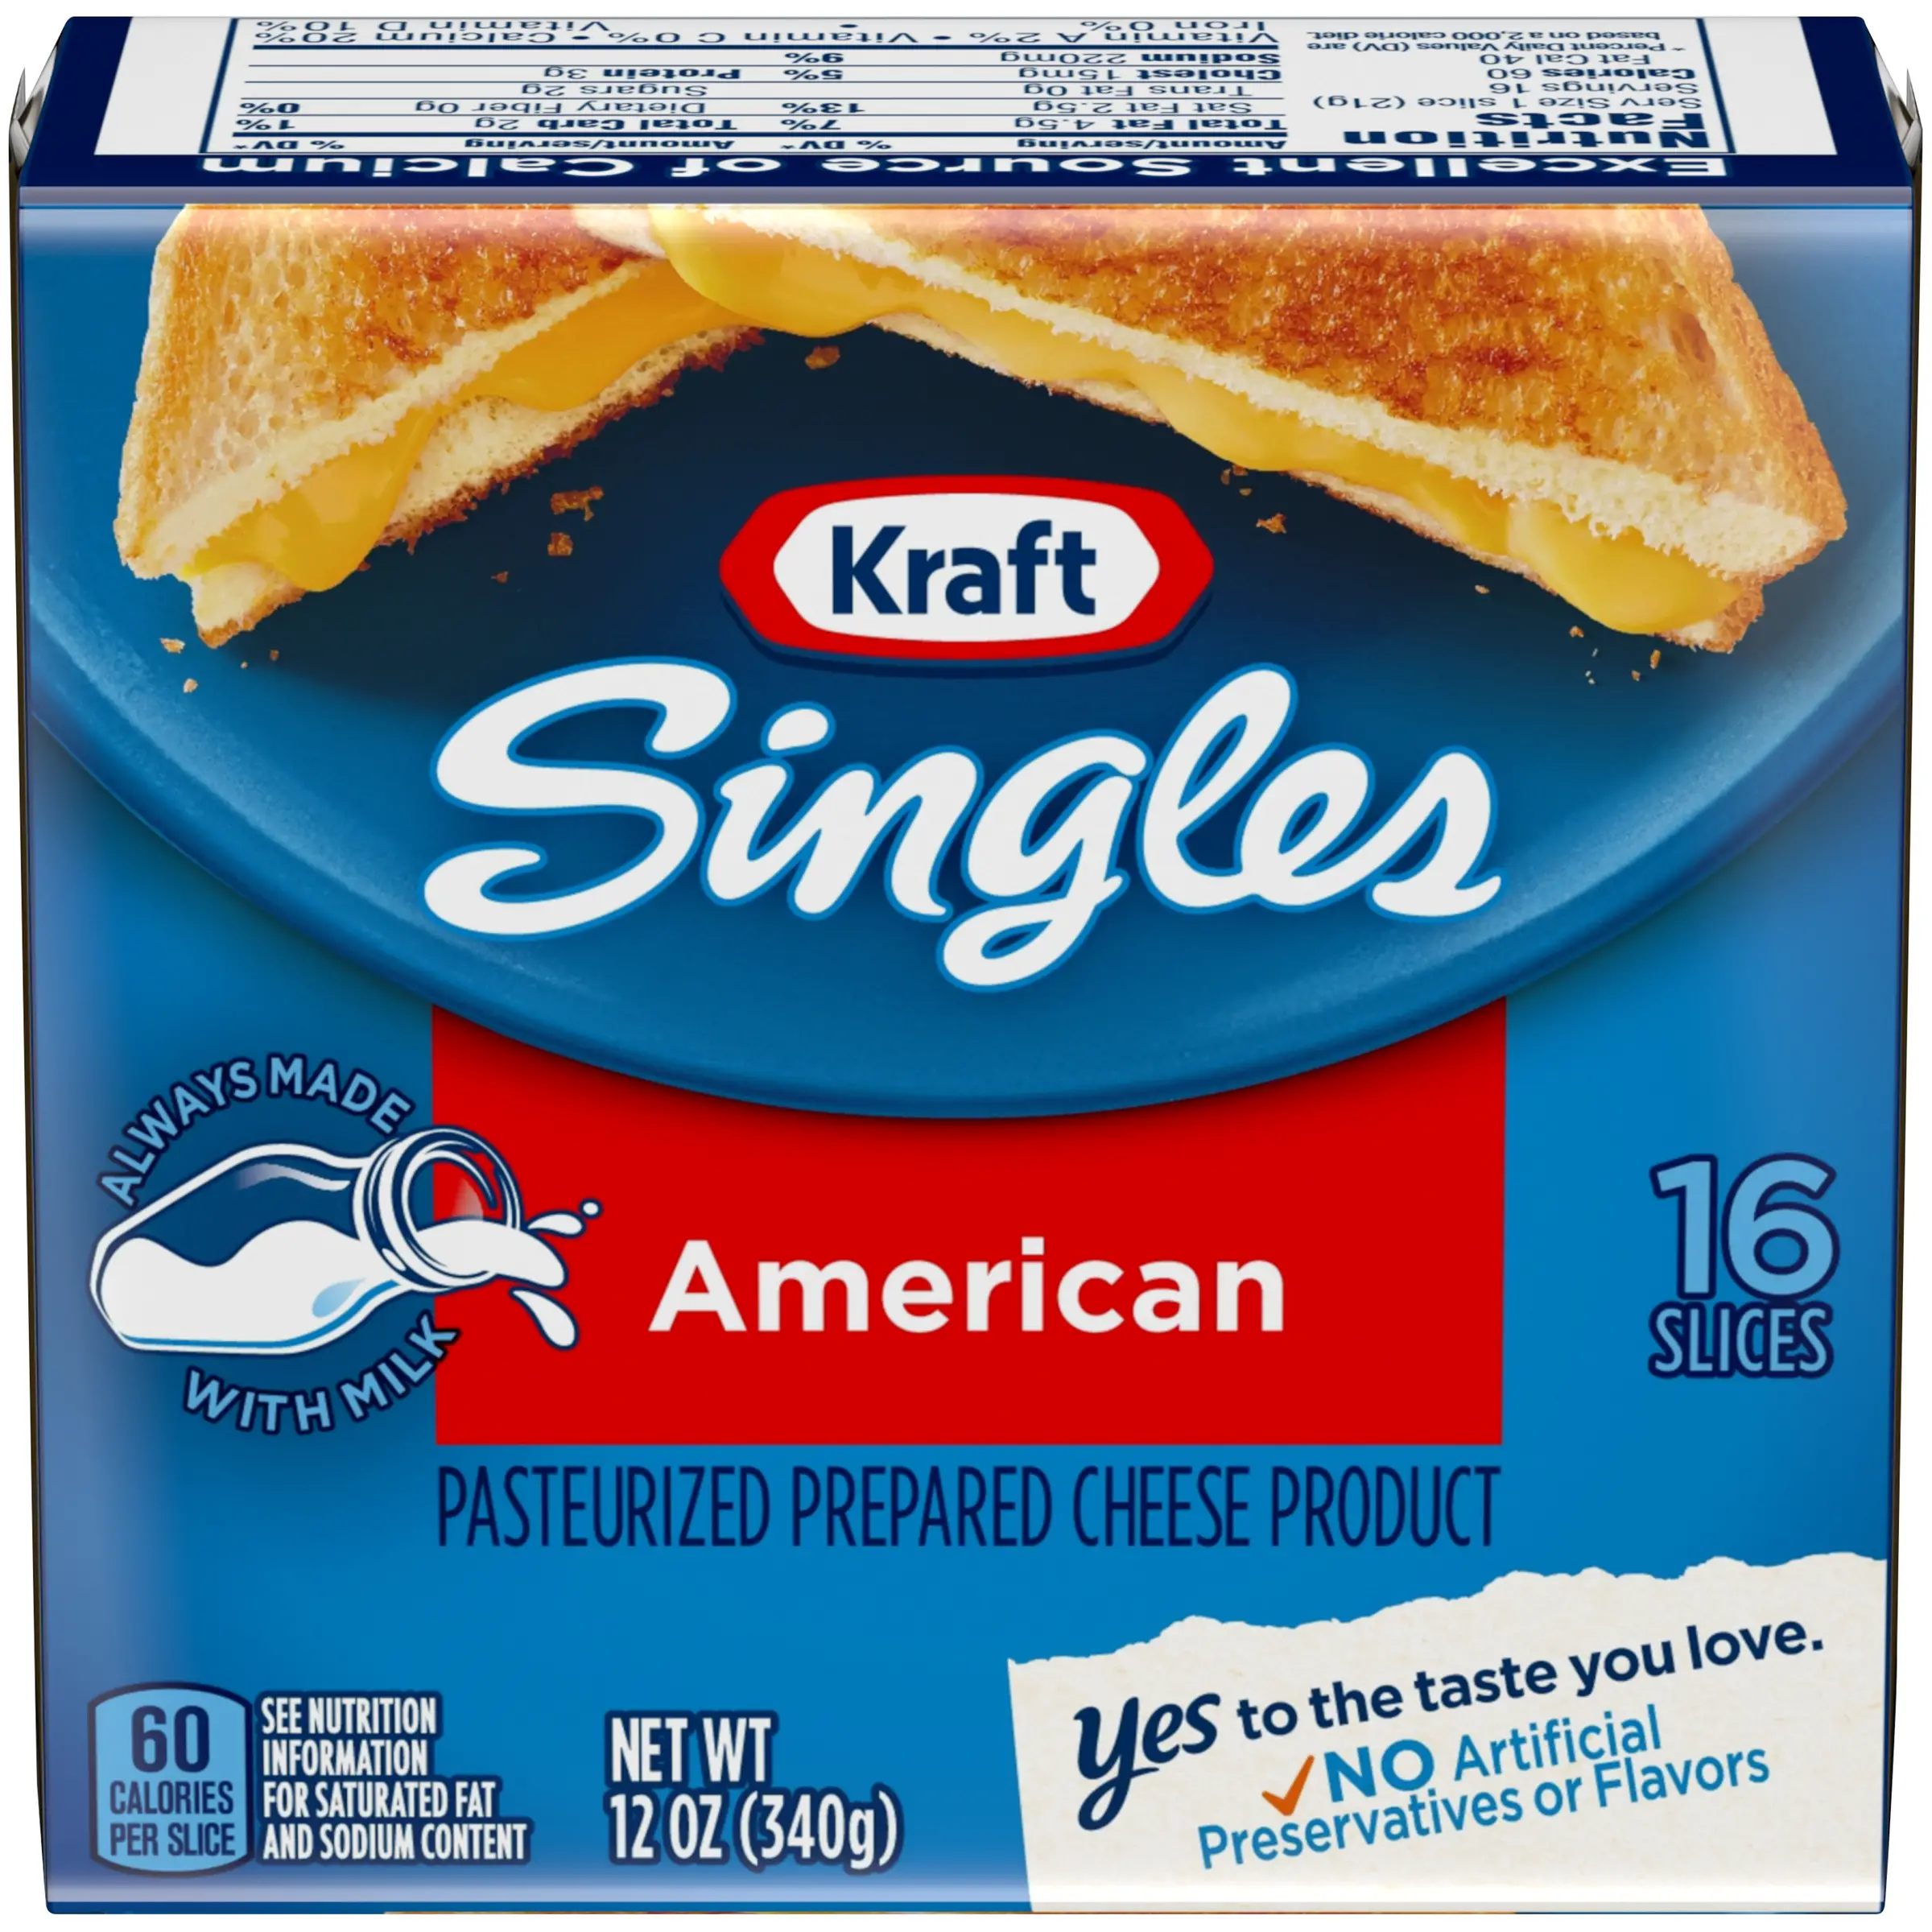 Kraft Singles Cheese Product, Pasteurized, Prepared ...